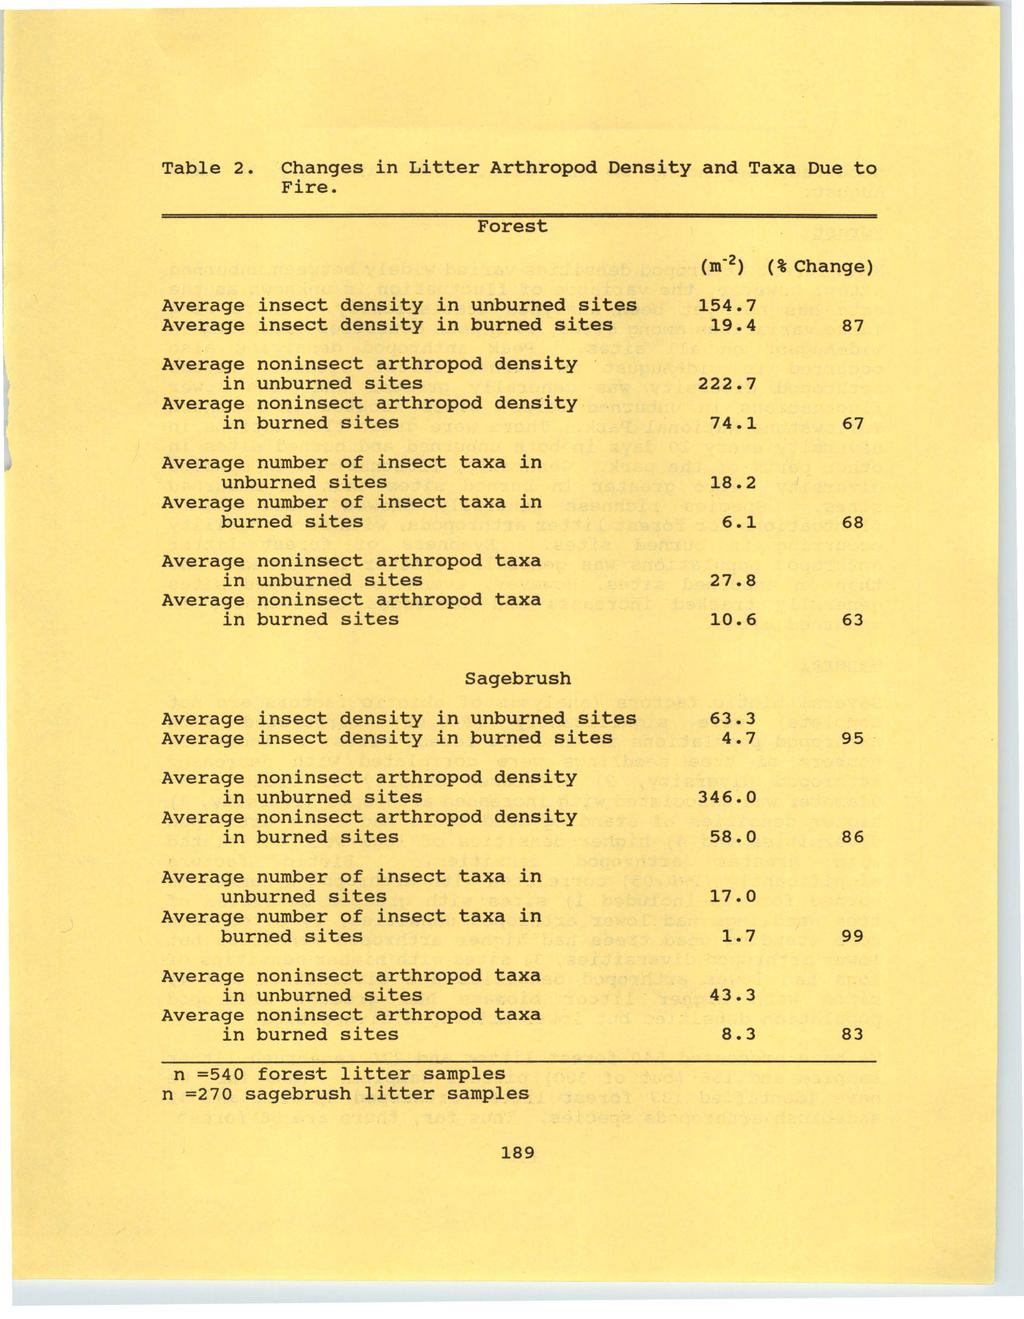 University of Wyoming National Park Service Research Center Annual Report, Vol. 13 [1989], Art. 34 Table 2. Changes in Litter Arthropod Density and Taxa Due to Fire.